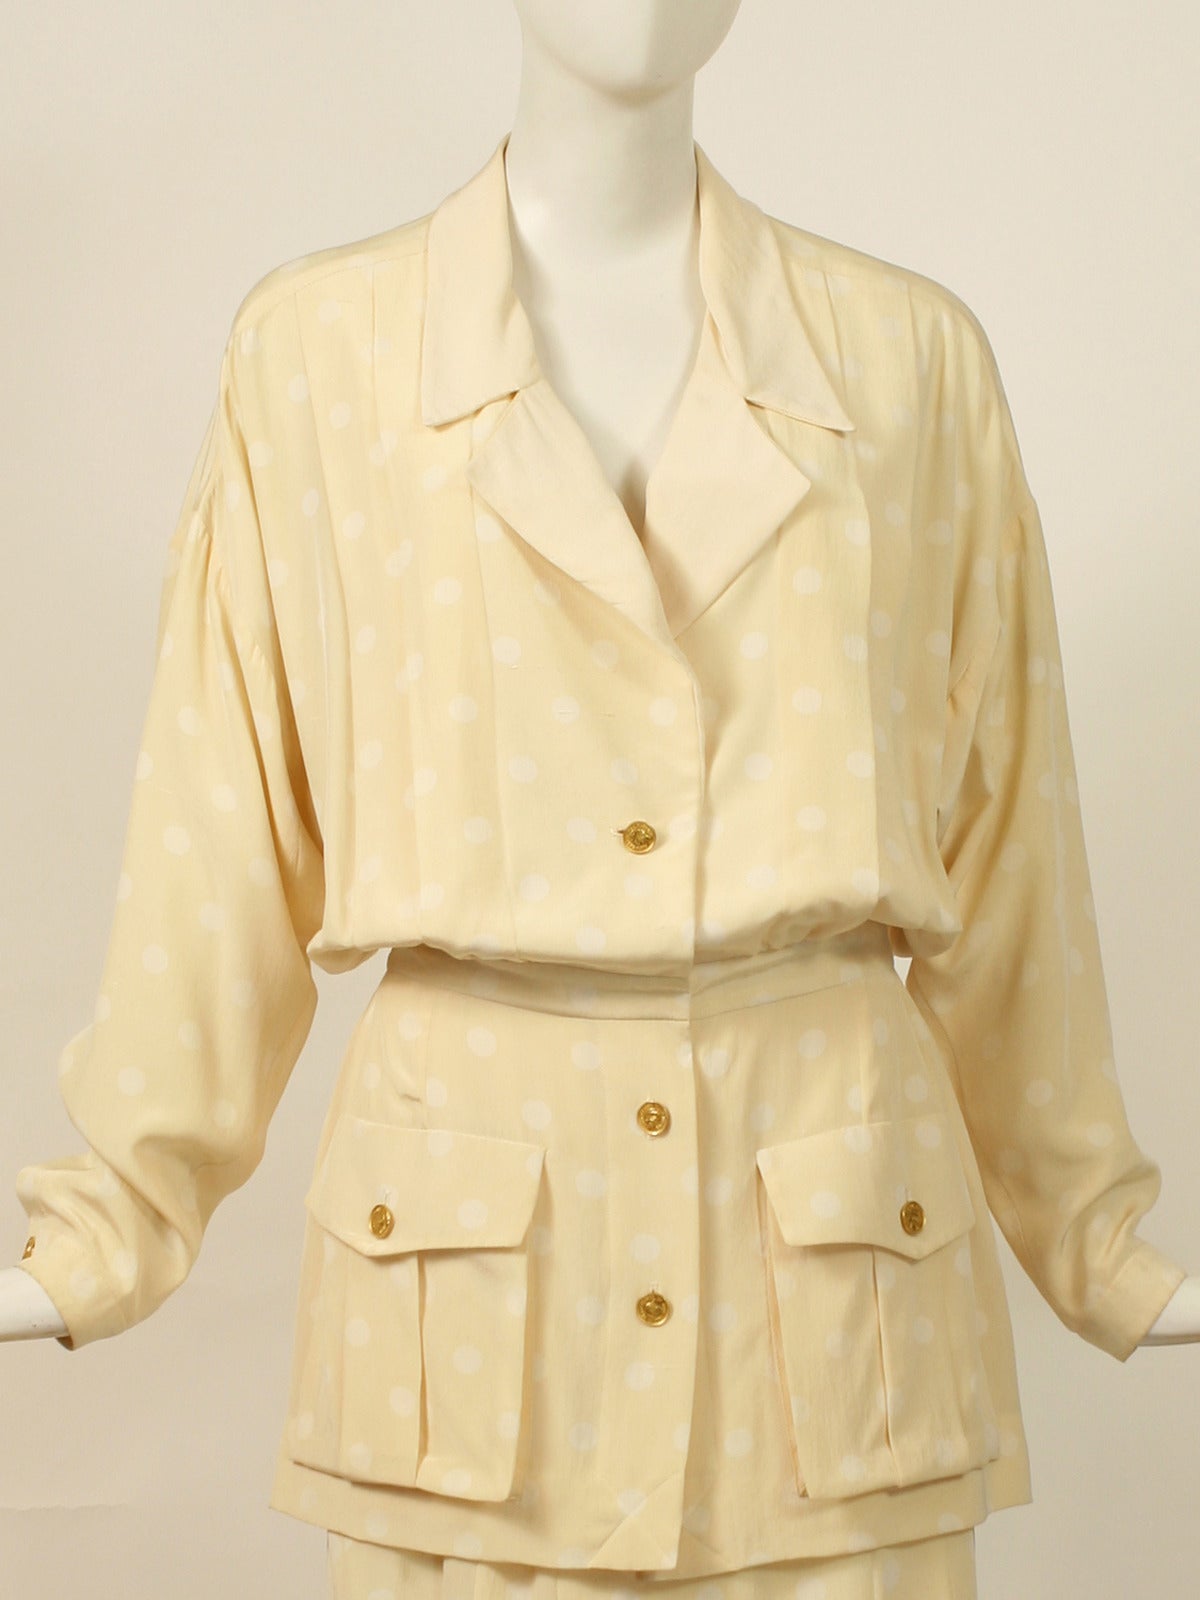 1990's Chanel Cream and White Polka-Dot Silk Suit
This a lovely suit made with polka dot silk fabric in a safari style silhouette . Pleated skirt. Gold Coco Chanel profile buttons throughout. Pleating detail on the back of  blouse. 
Excellent